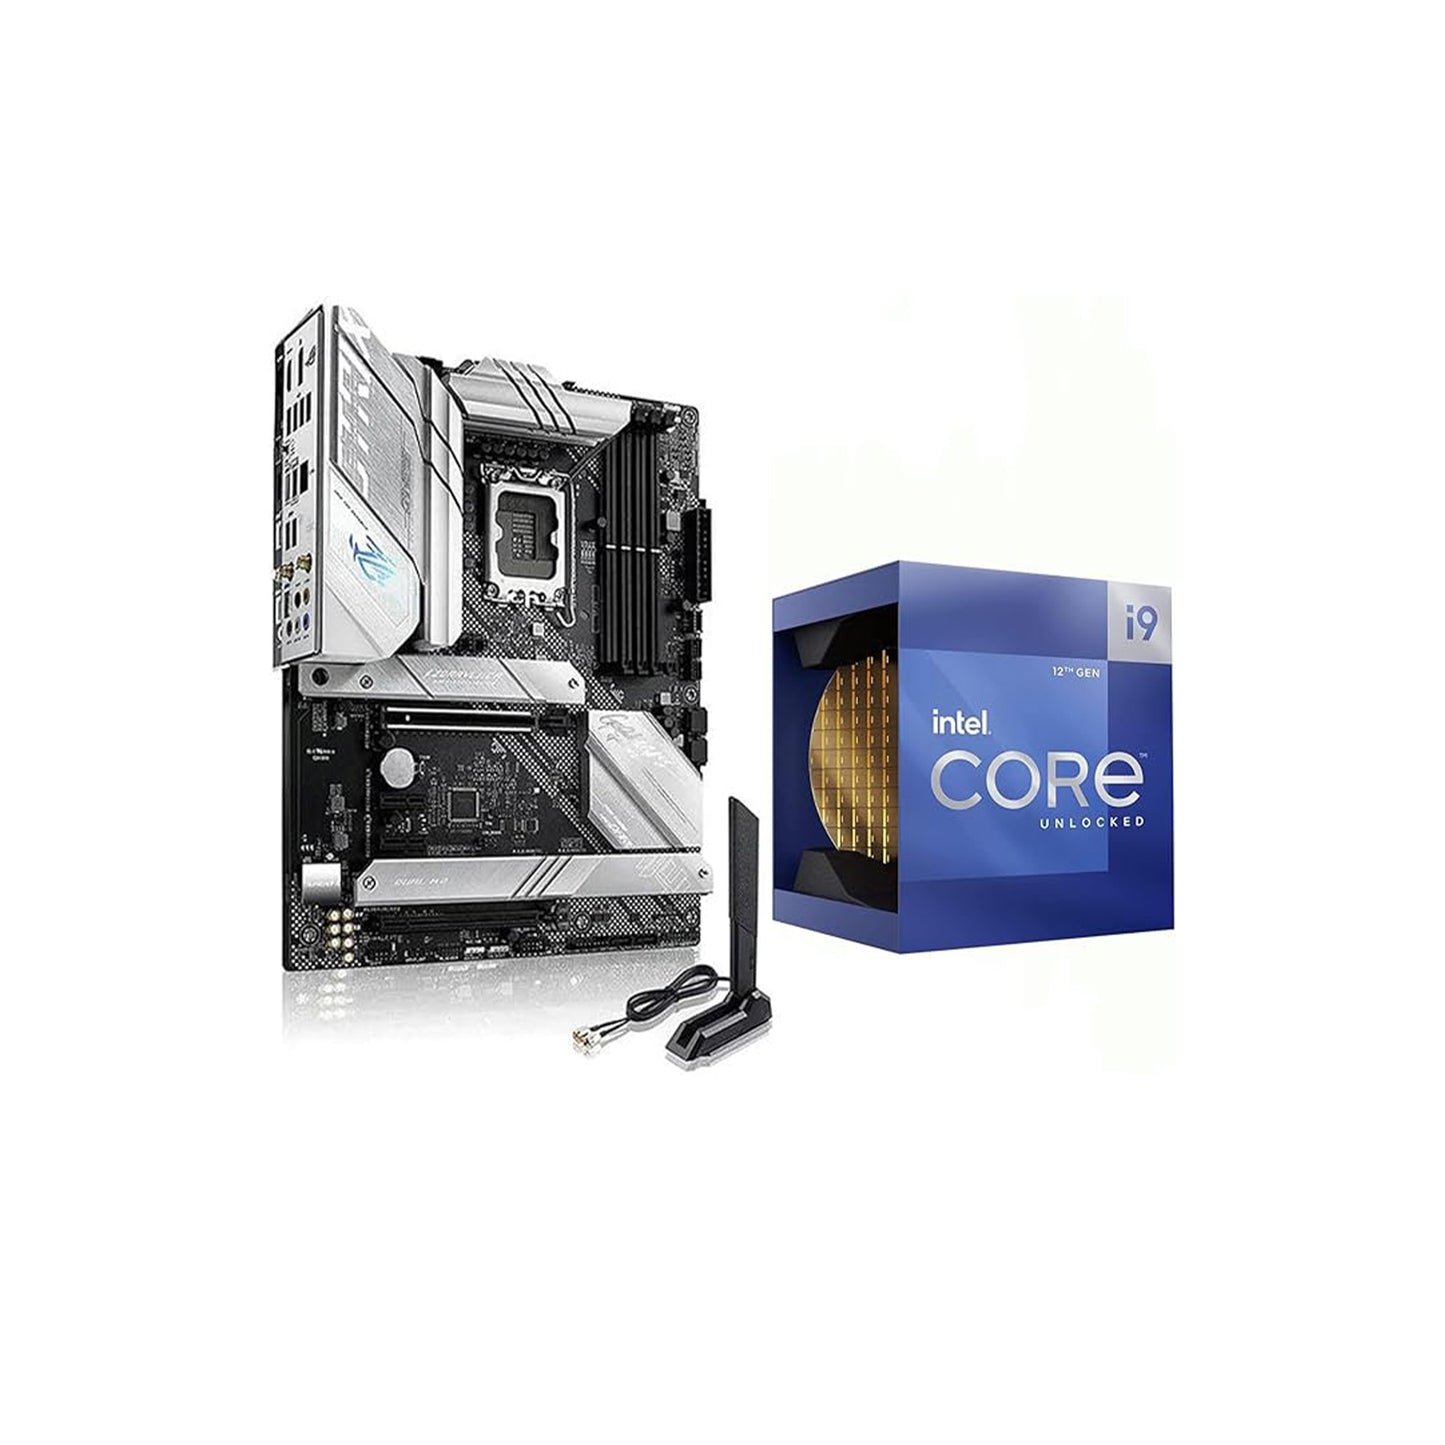 Micro Center Intel Core i9-12900K 16 Cores up to 5.2 GHz Unlocked Desktop Processor Bundle with ASUS ROG Strix B660-A Gaming WiFi DDR5 LGA 1700 ATX Gaming Motherboard